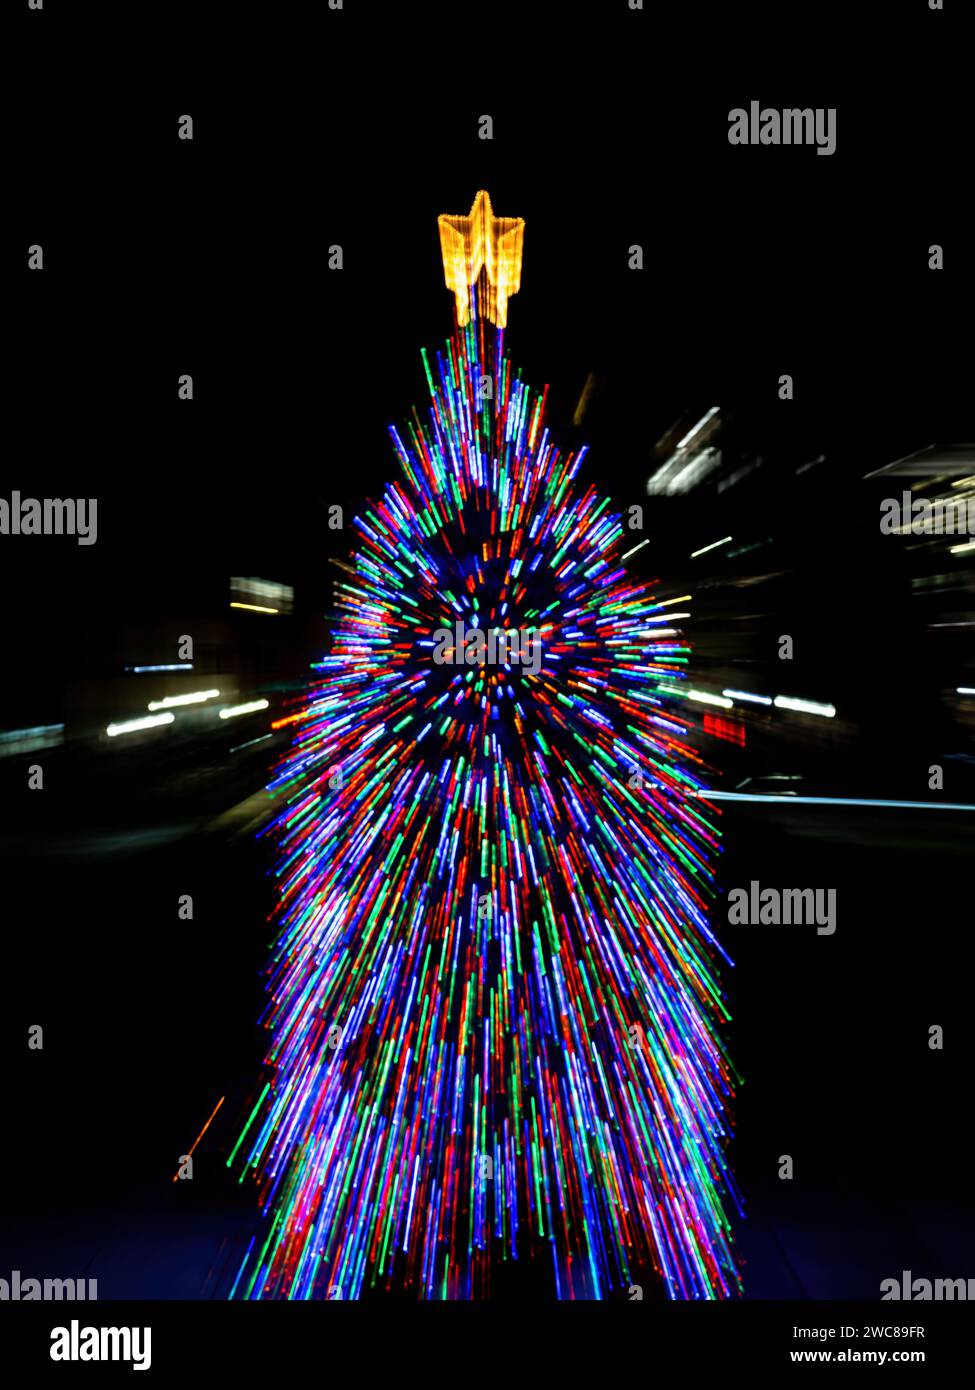 Motion blur effect of a Christmas tree at night Stock Photo